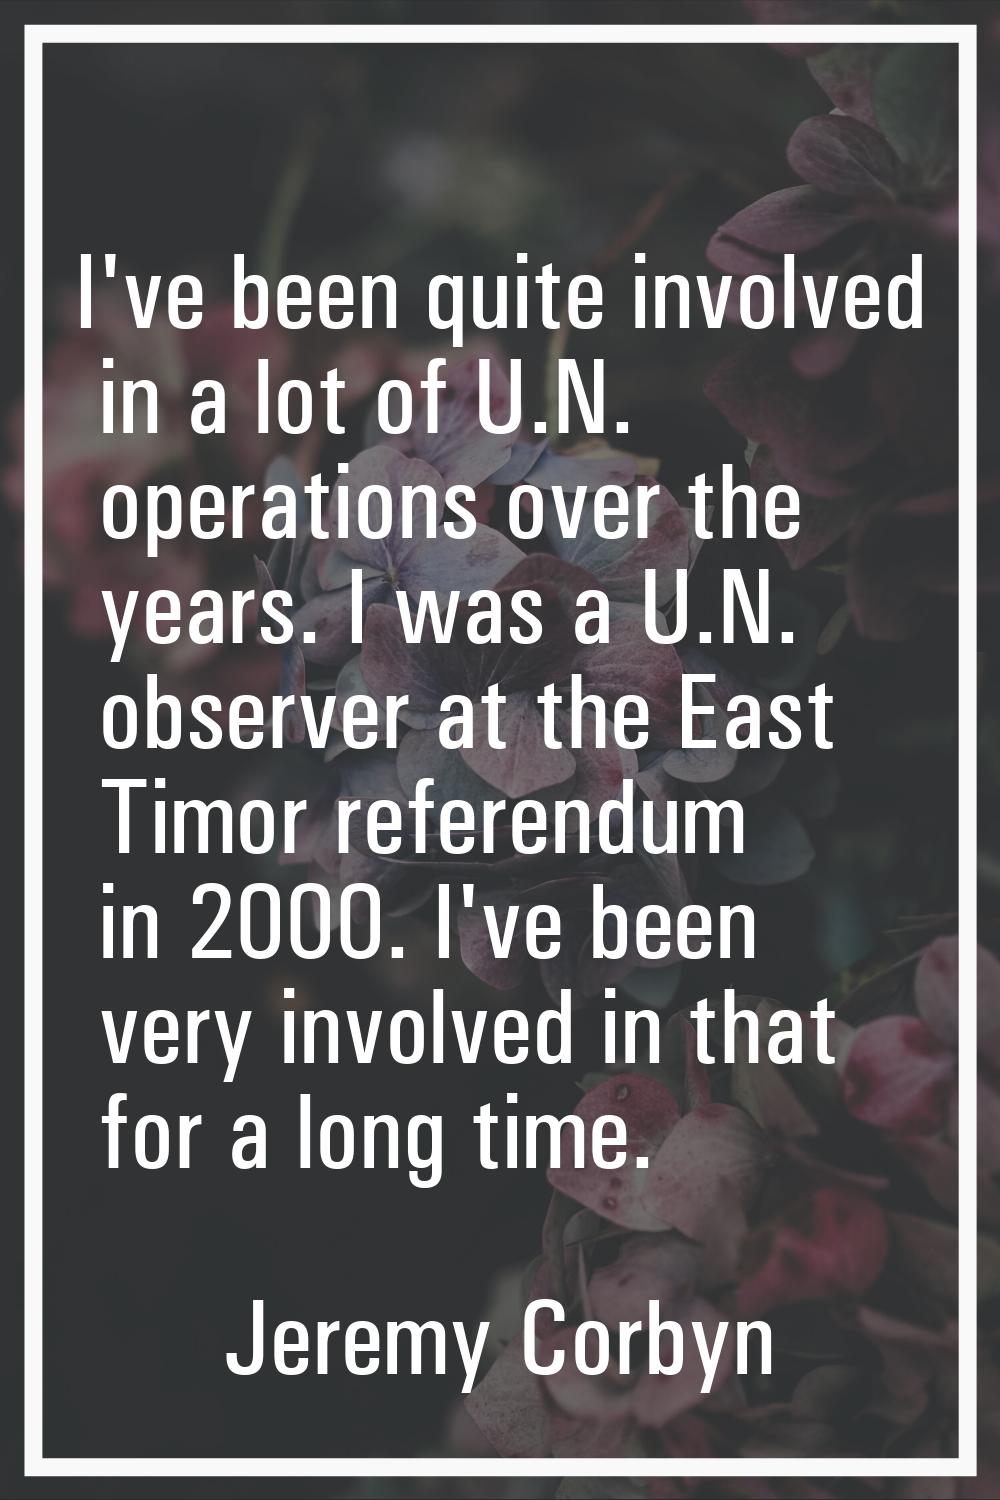 I've been quite involved in a lot of U.N. operations over the years. I was a U.N. observer at the E